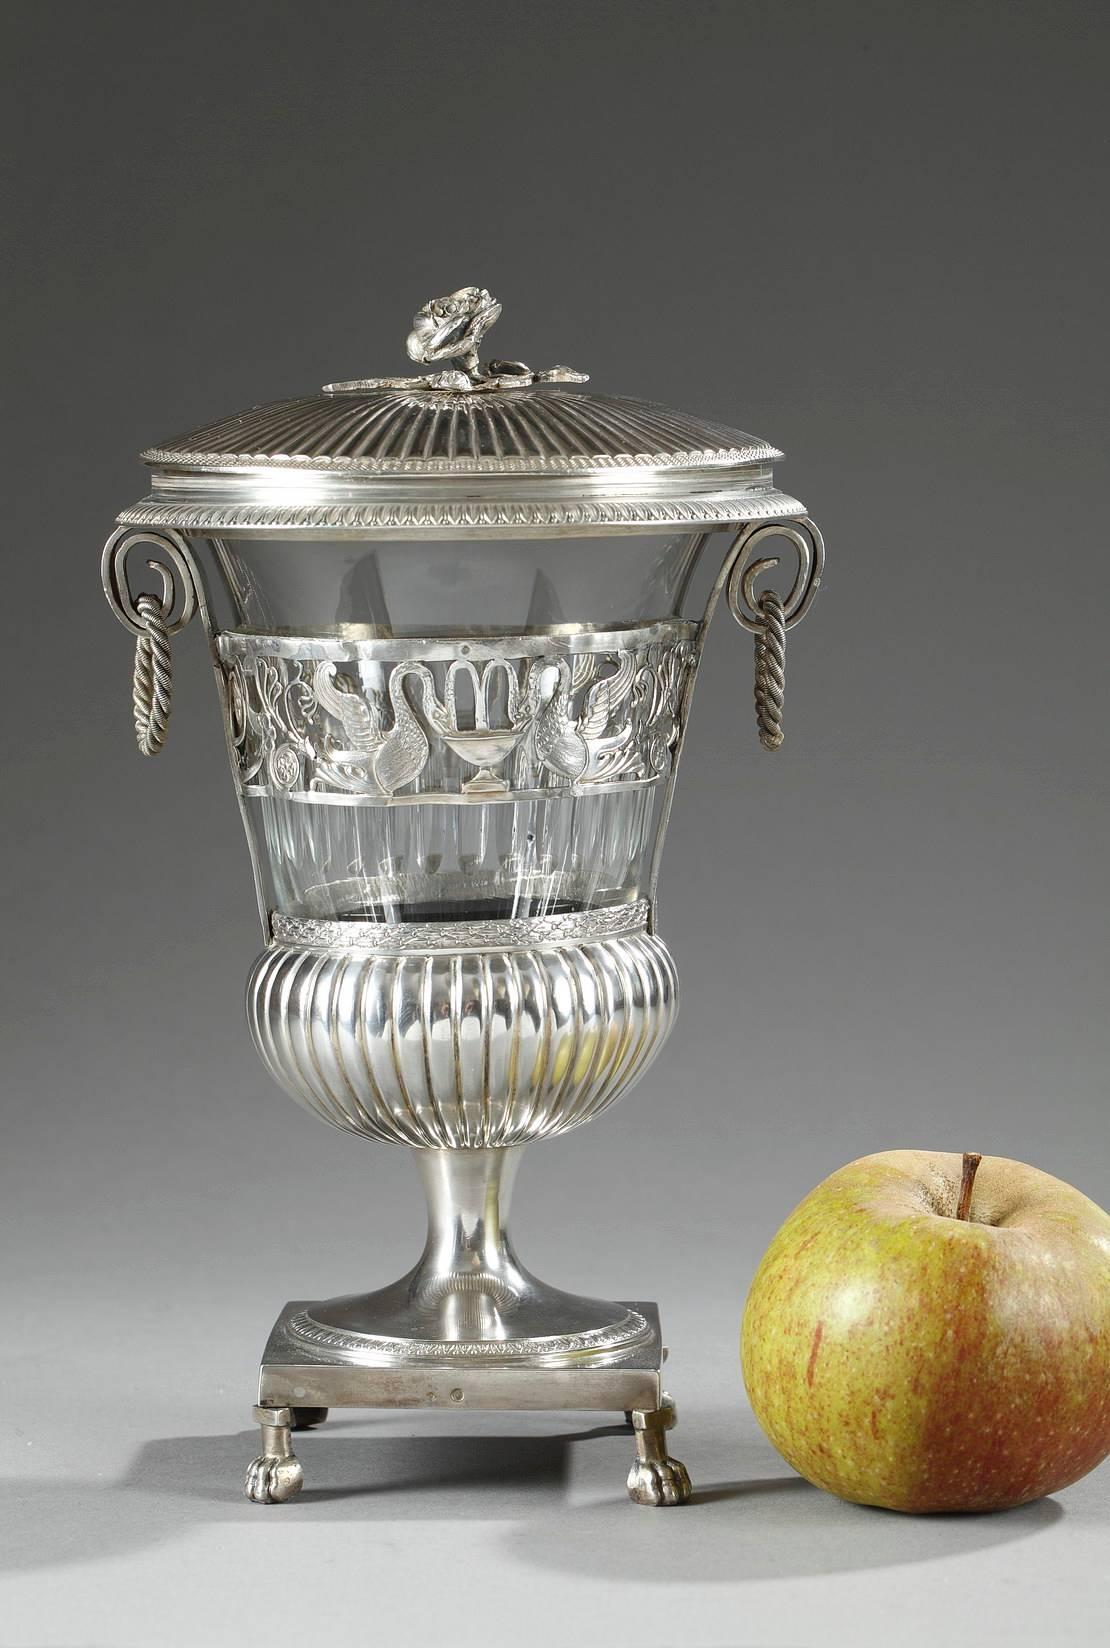 Early 19th century candy dish in silver and crystal. Its silver lid is accented with gadrooning that radiates out from a rose that forms the handle of the lid. The crystal body is set in openwork silver and depicts swans drinking from a fountain,